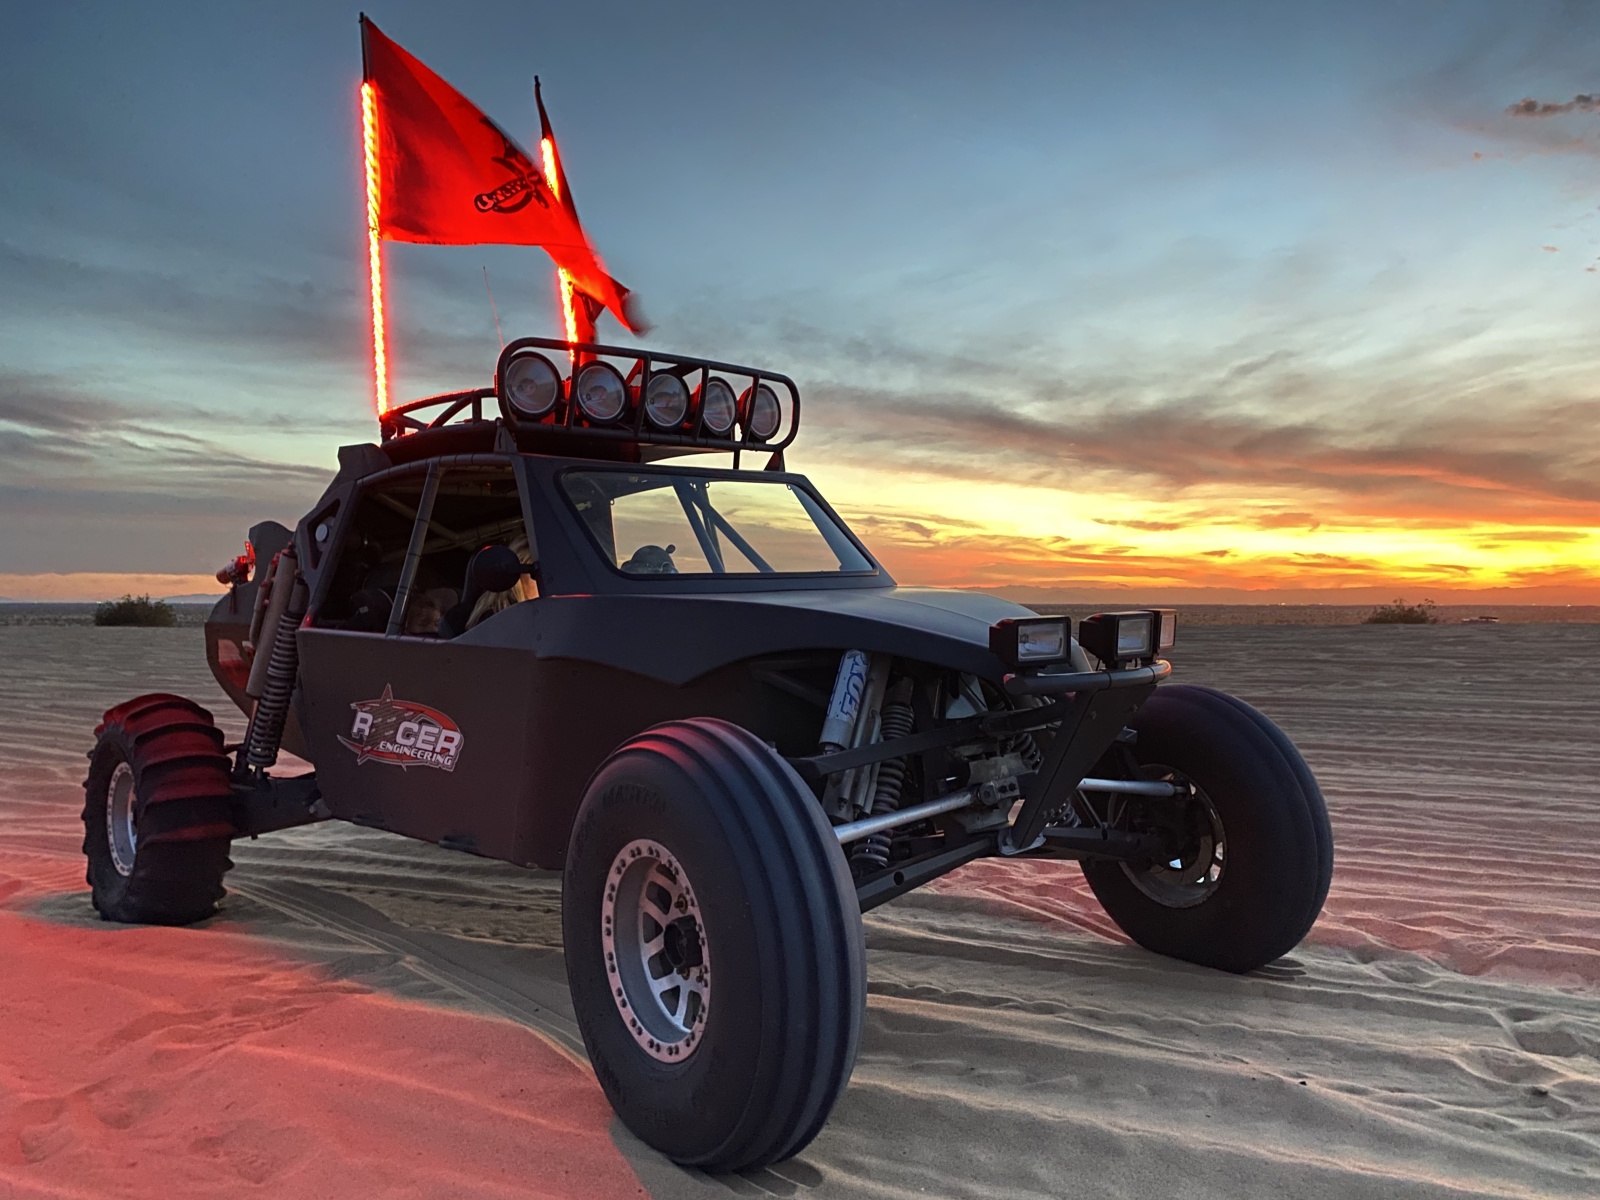 For Sale: Racer Engineering Prerunner (4 seat), Class 1 car - photo12